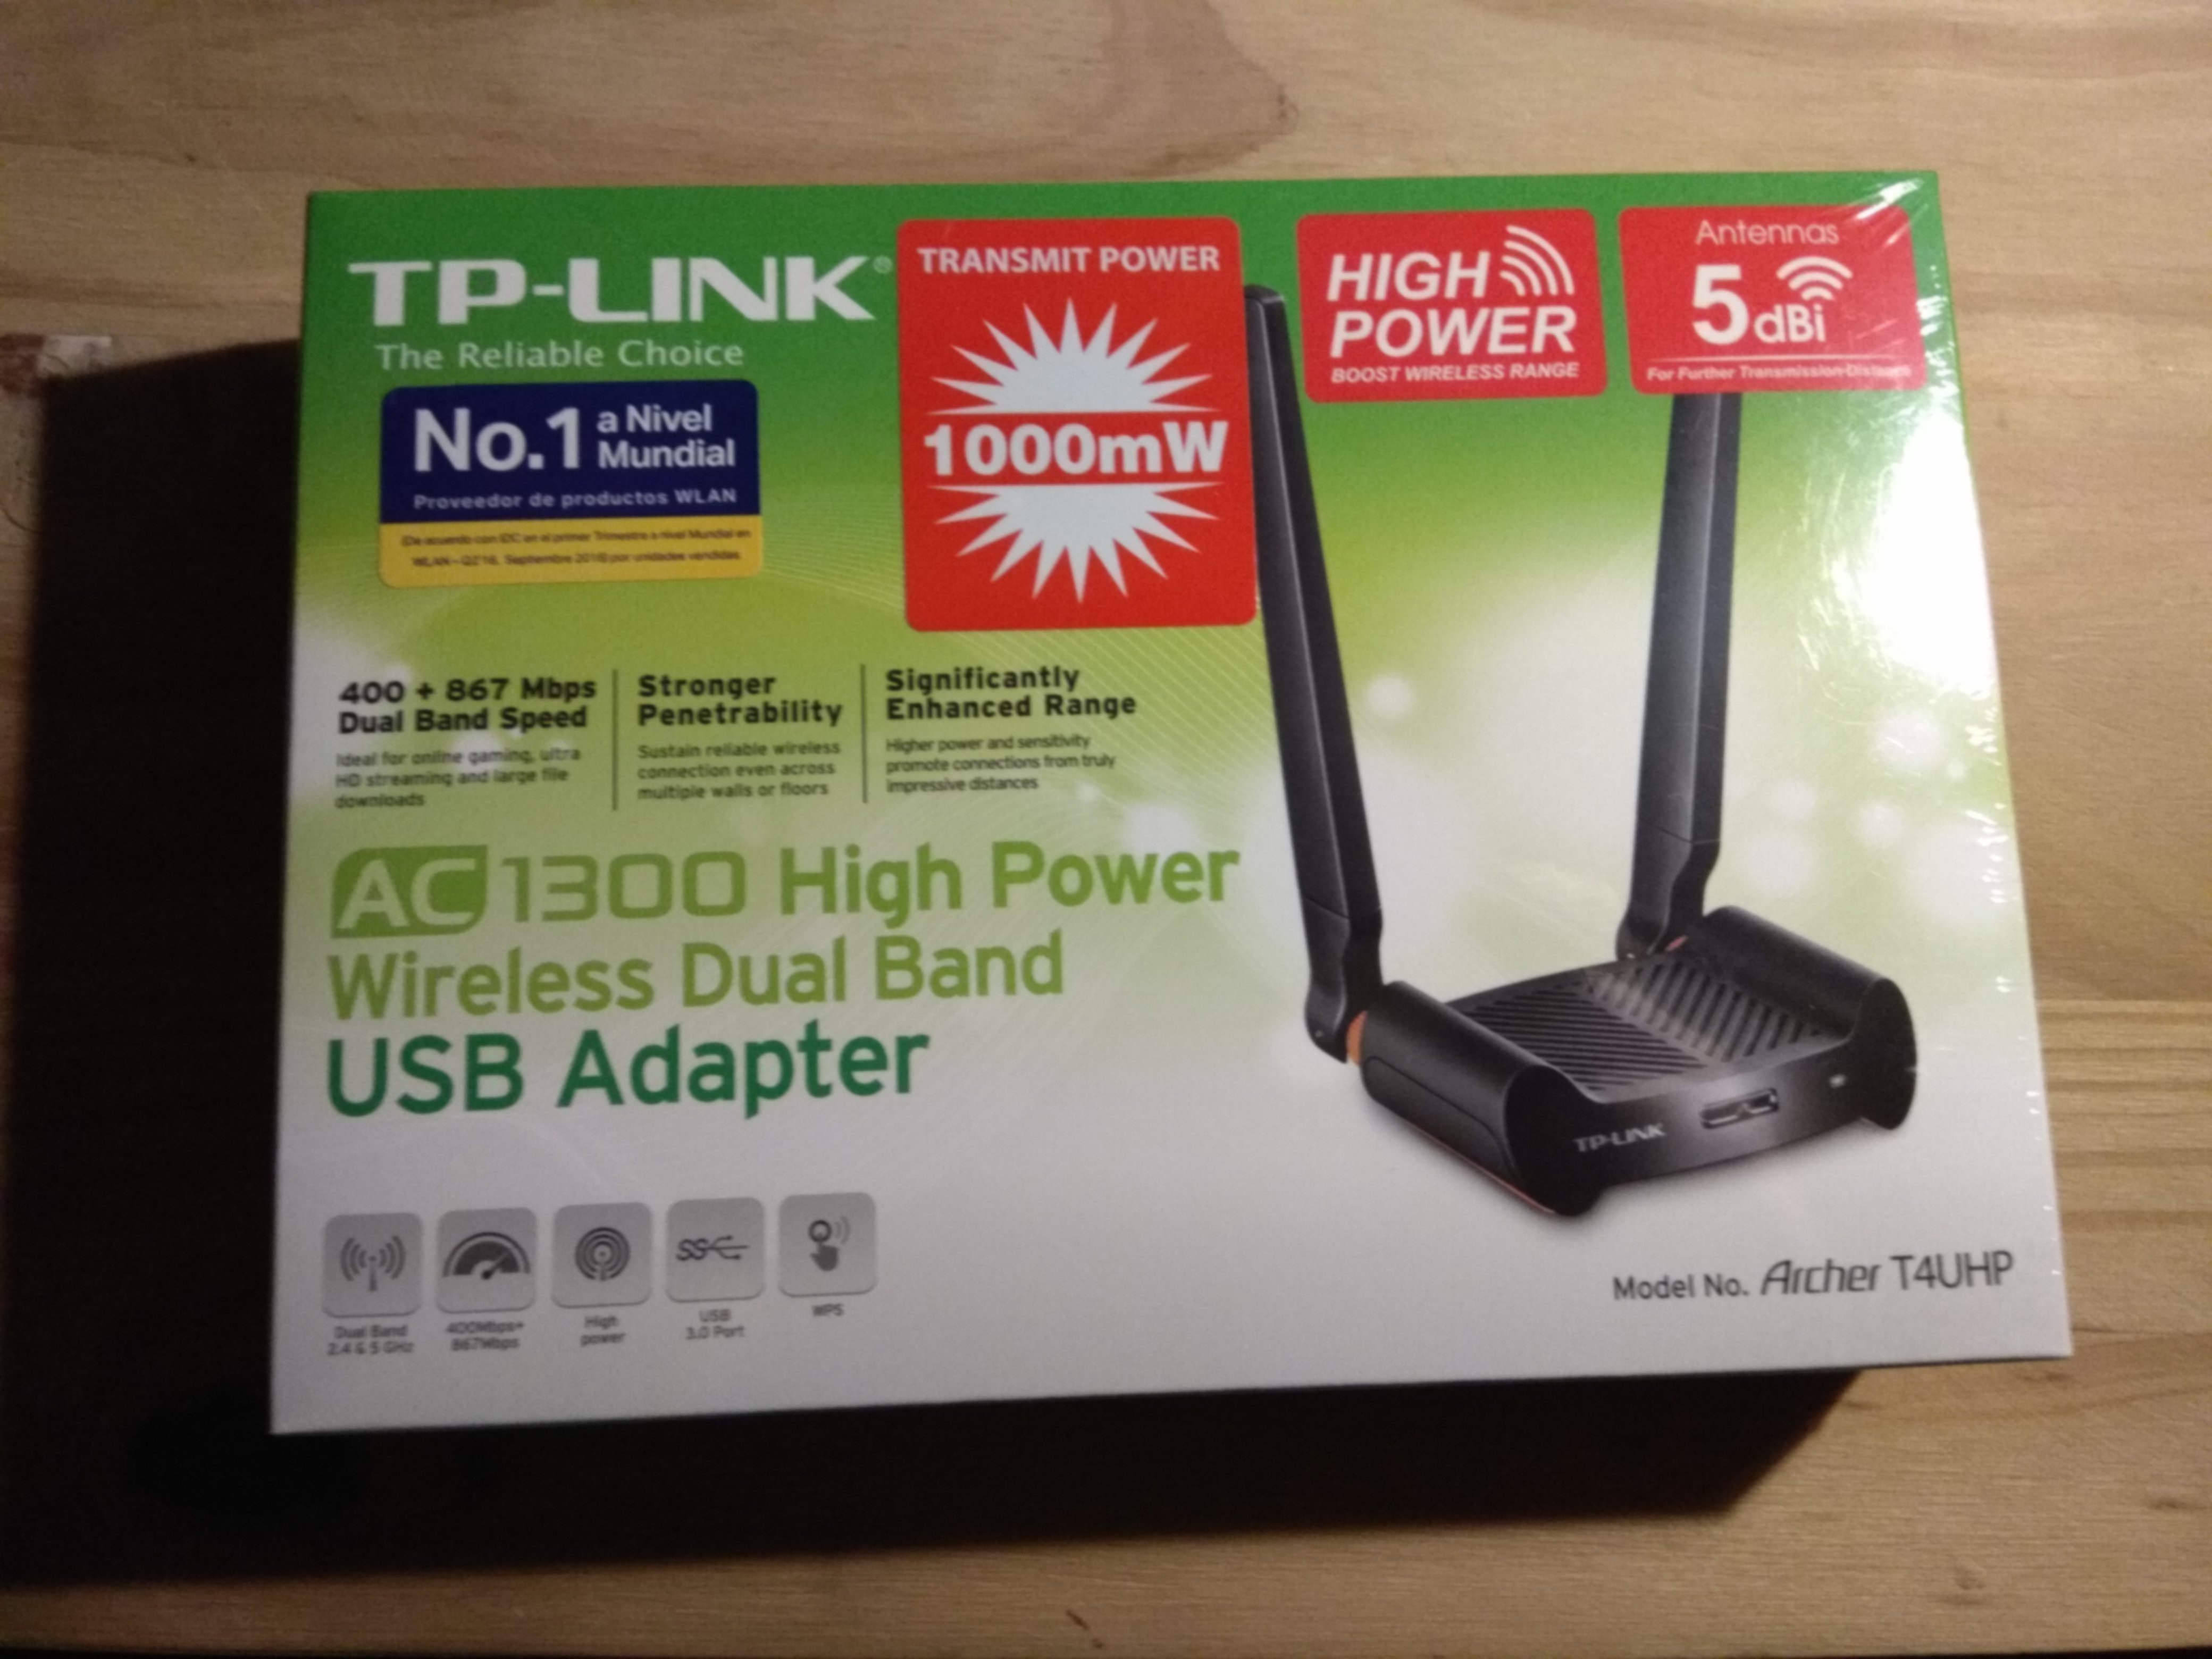 The TP-Link Archer T4UHP AC1300 Box